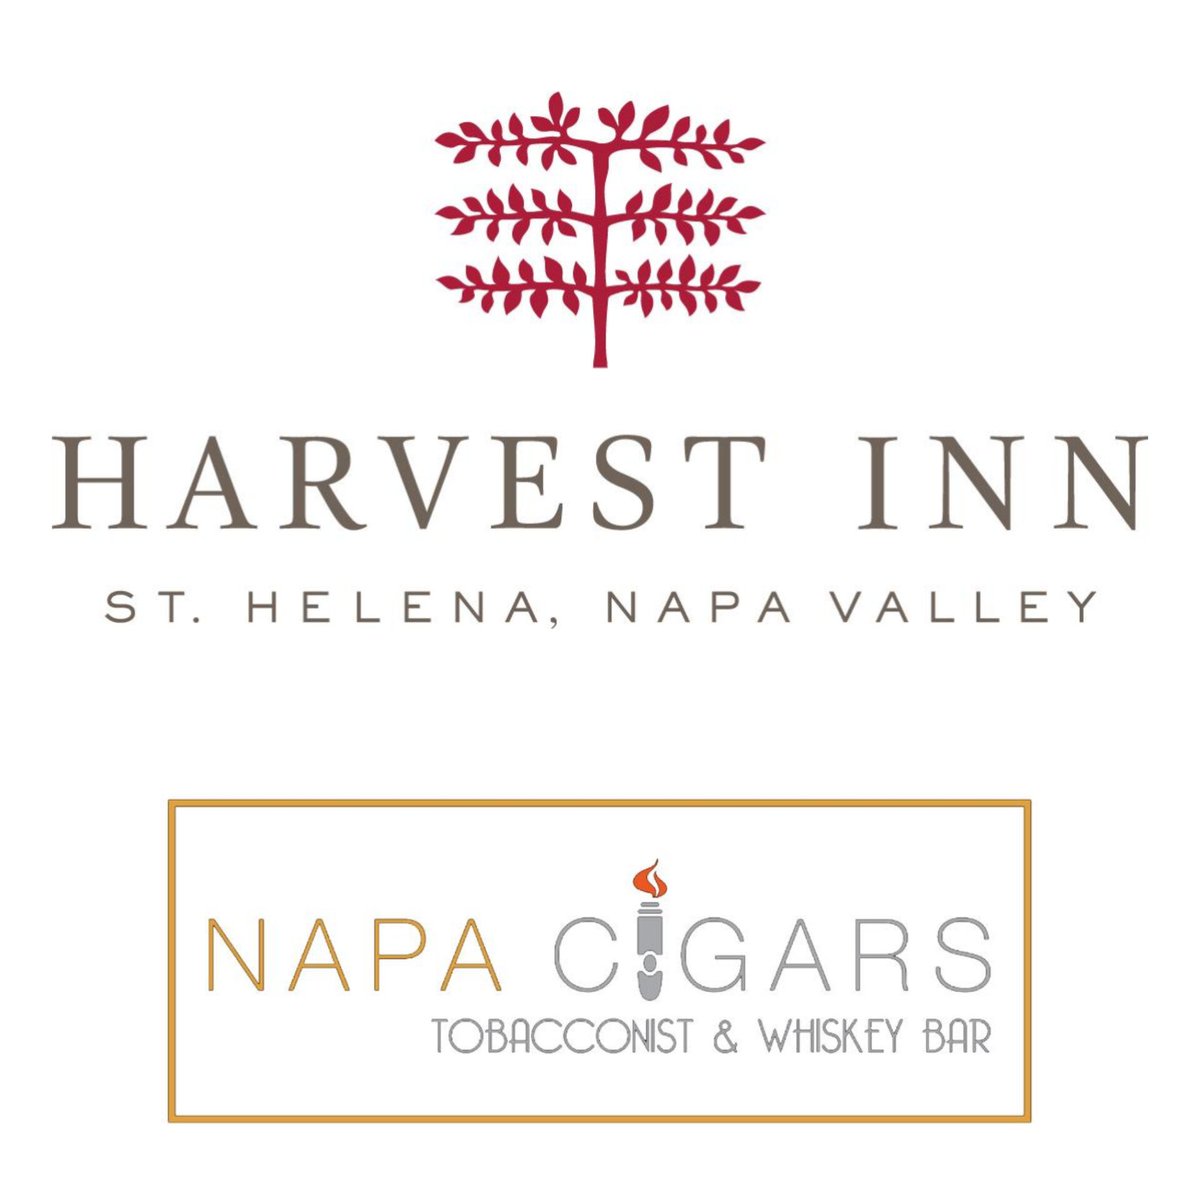 Next up is Napa... always enjoy kicking the spring off with @NapaCigars and @harvest_inn for their cigar dinner series.. lighting up their tomorrow evening with @duckhornwine for the pairings.. #CohibaCigars #NapaCigars #HarvestInn #DuckhornVineyards #NapaValley #ExperienceLuxury